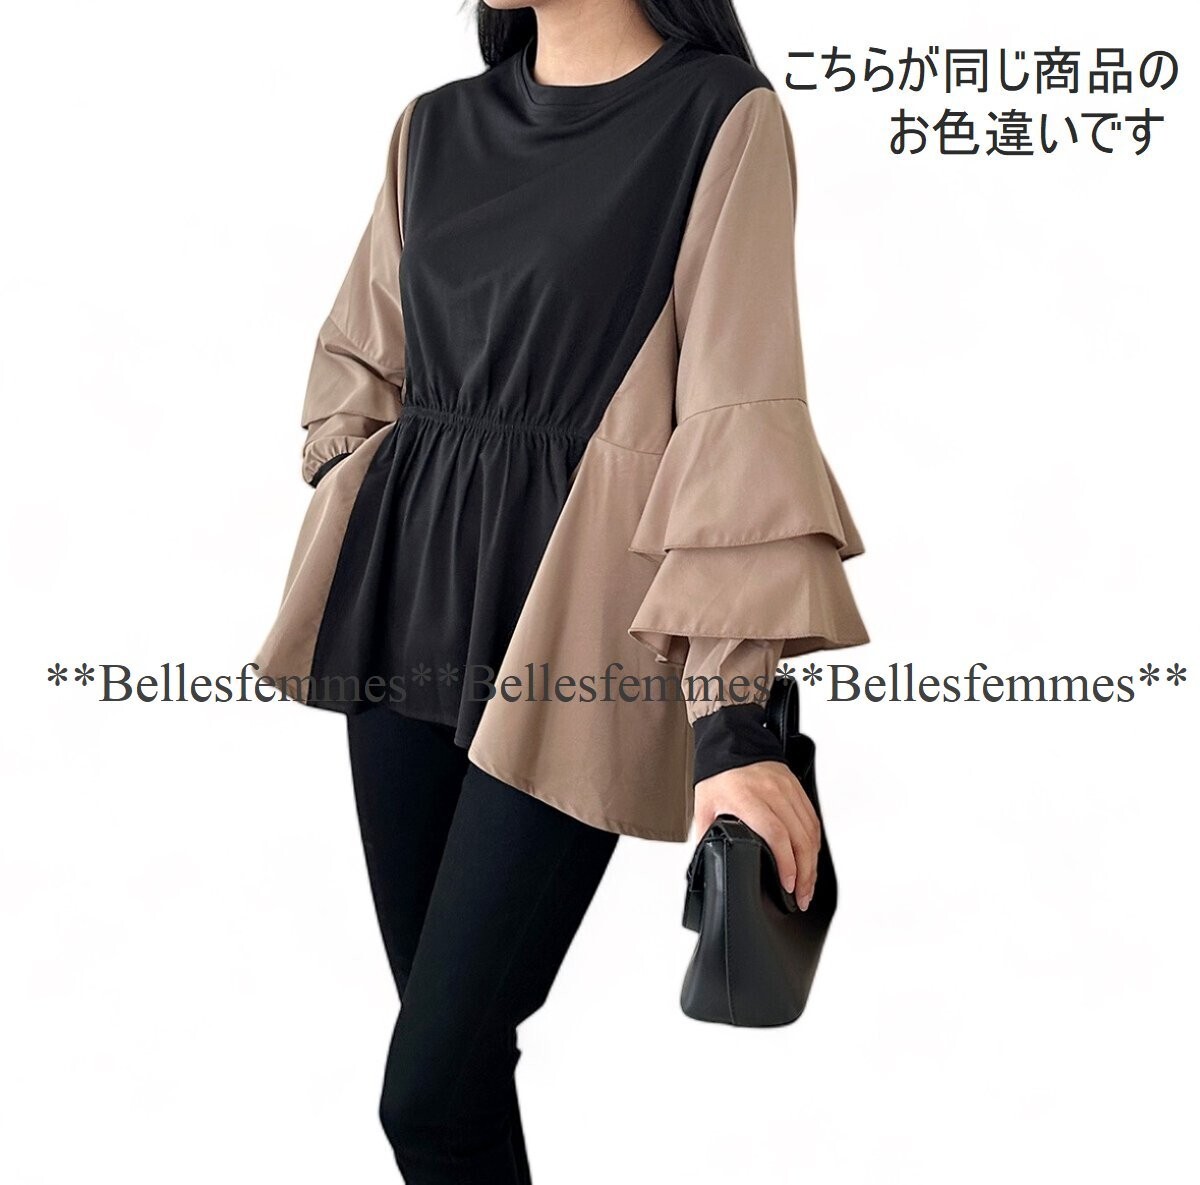 *Belles** postage 185 jpy * new goods M~L correspondence * spring *. position class. frill sleeve * long tail tunic * unusual material switch * volume sleeve * easy tunic *182662